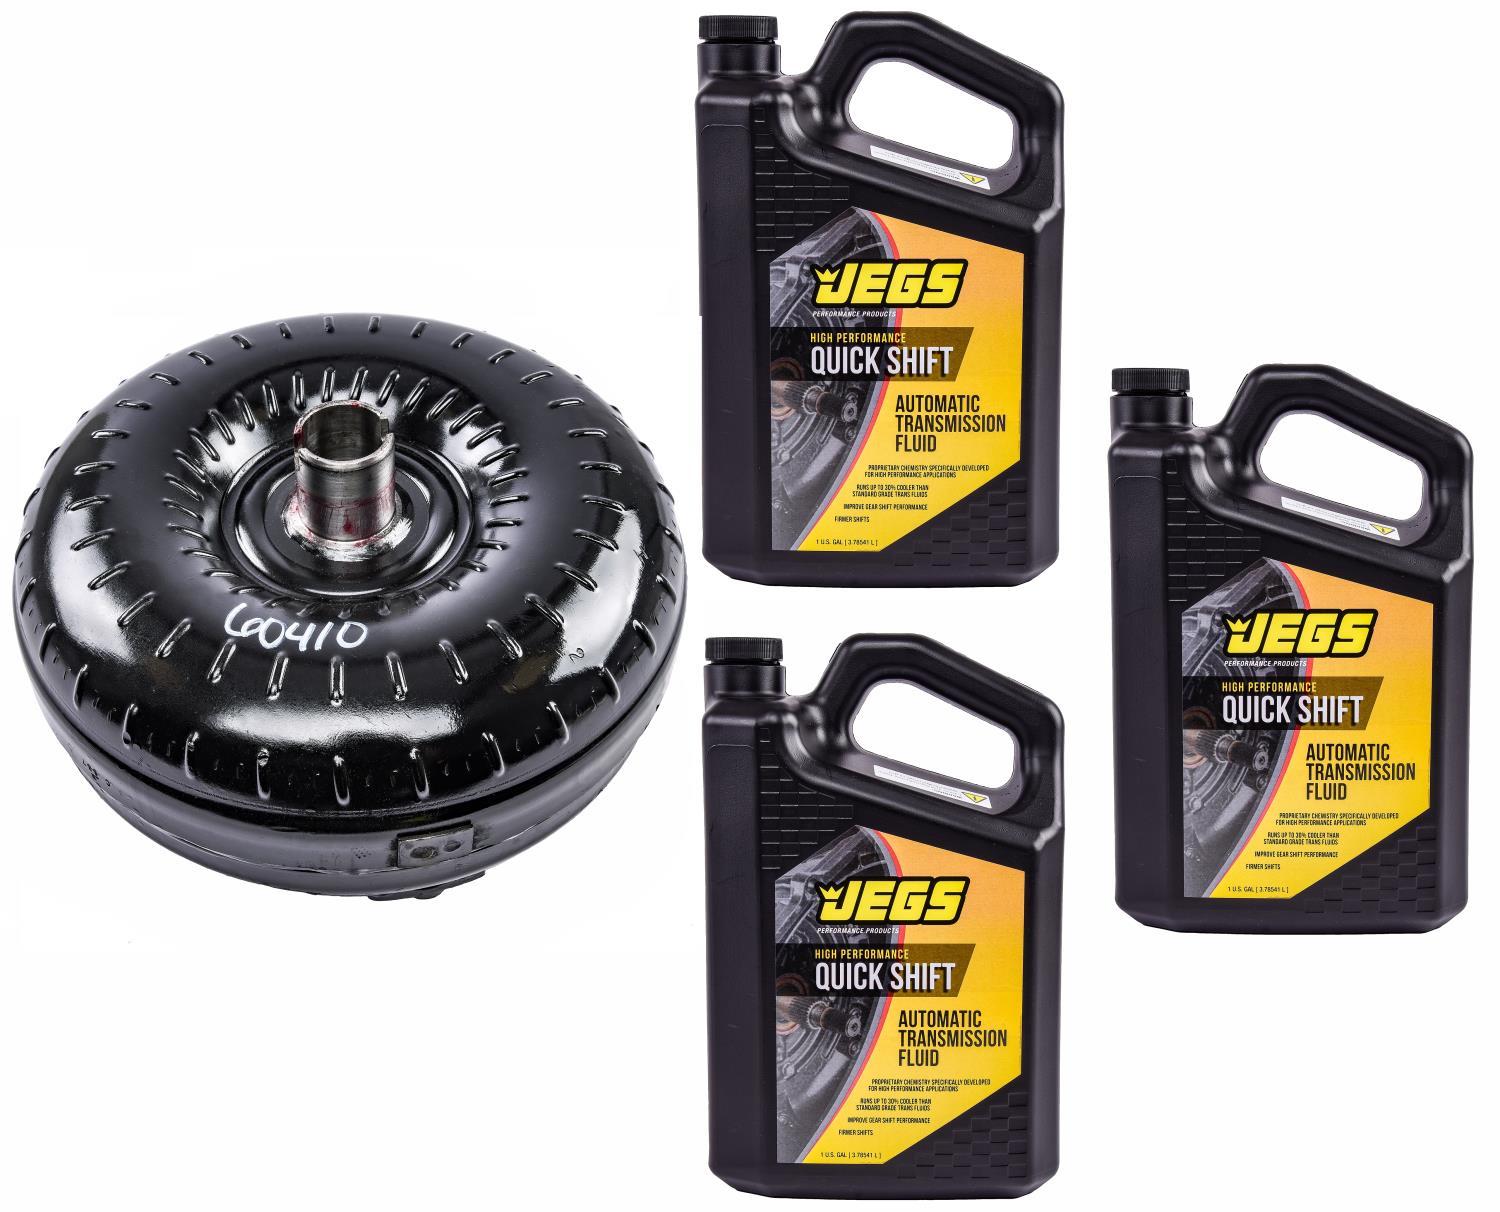 JEGS 60410K: Torque Converter Kit Fits GM 700R4 Automatic Transmission  Includes 2000-2400 RPM Stall Speed Converter  (3) Gallons of Quick Shift  Automatic Transmission Fluid JEGS